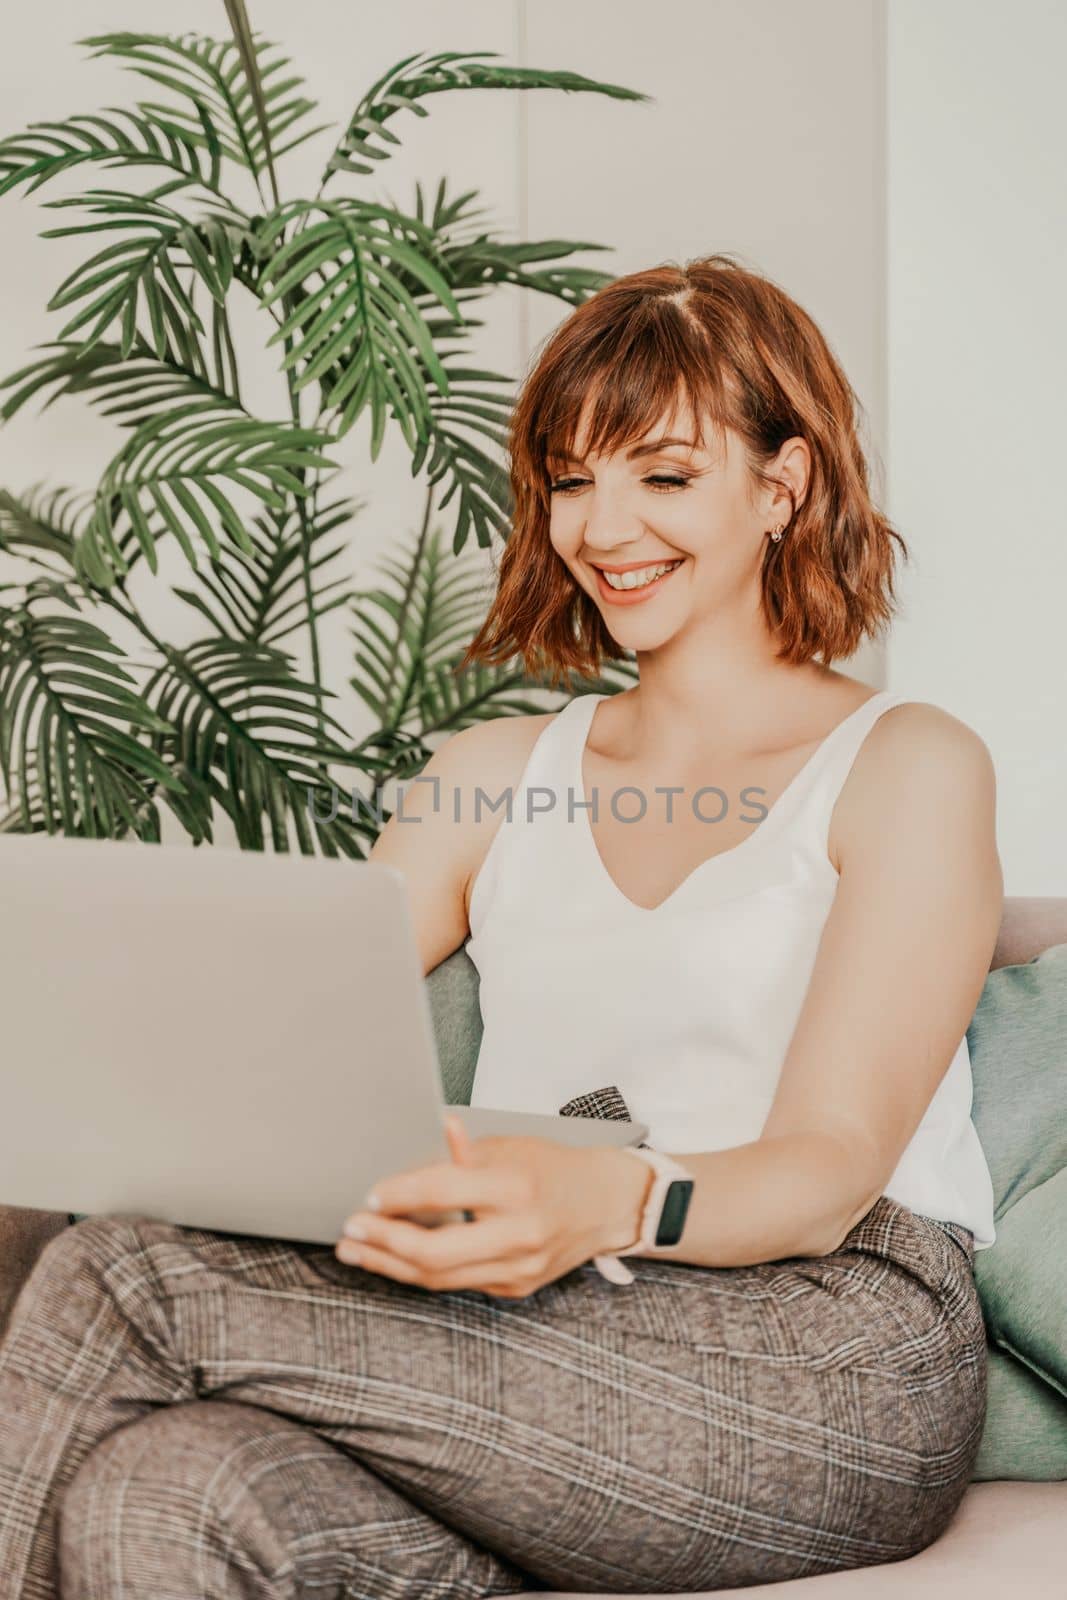 Brunette macbook sofa. Attractive young woman working on a laptop while sitting on the couch at home. She is wearing a light blouse and trousers